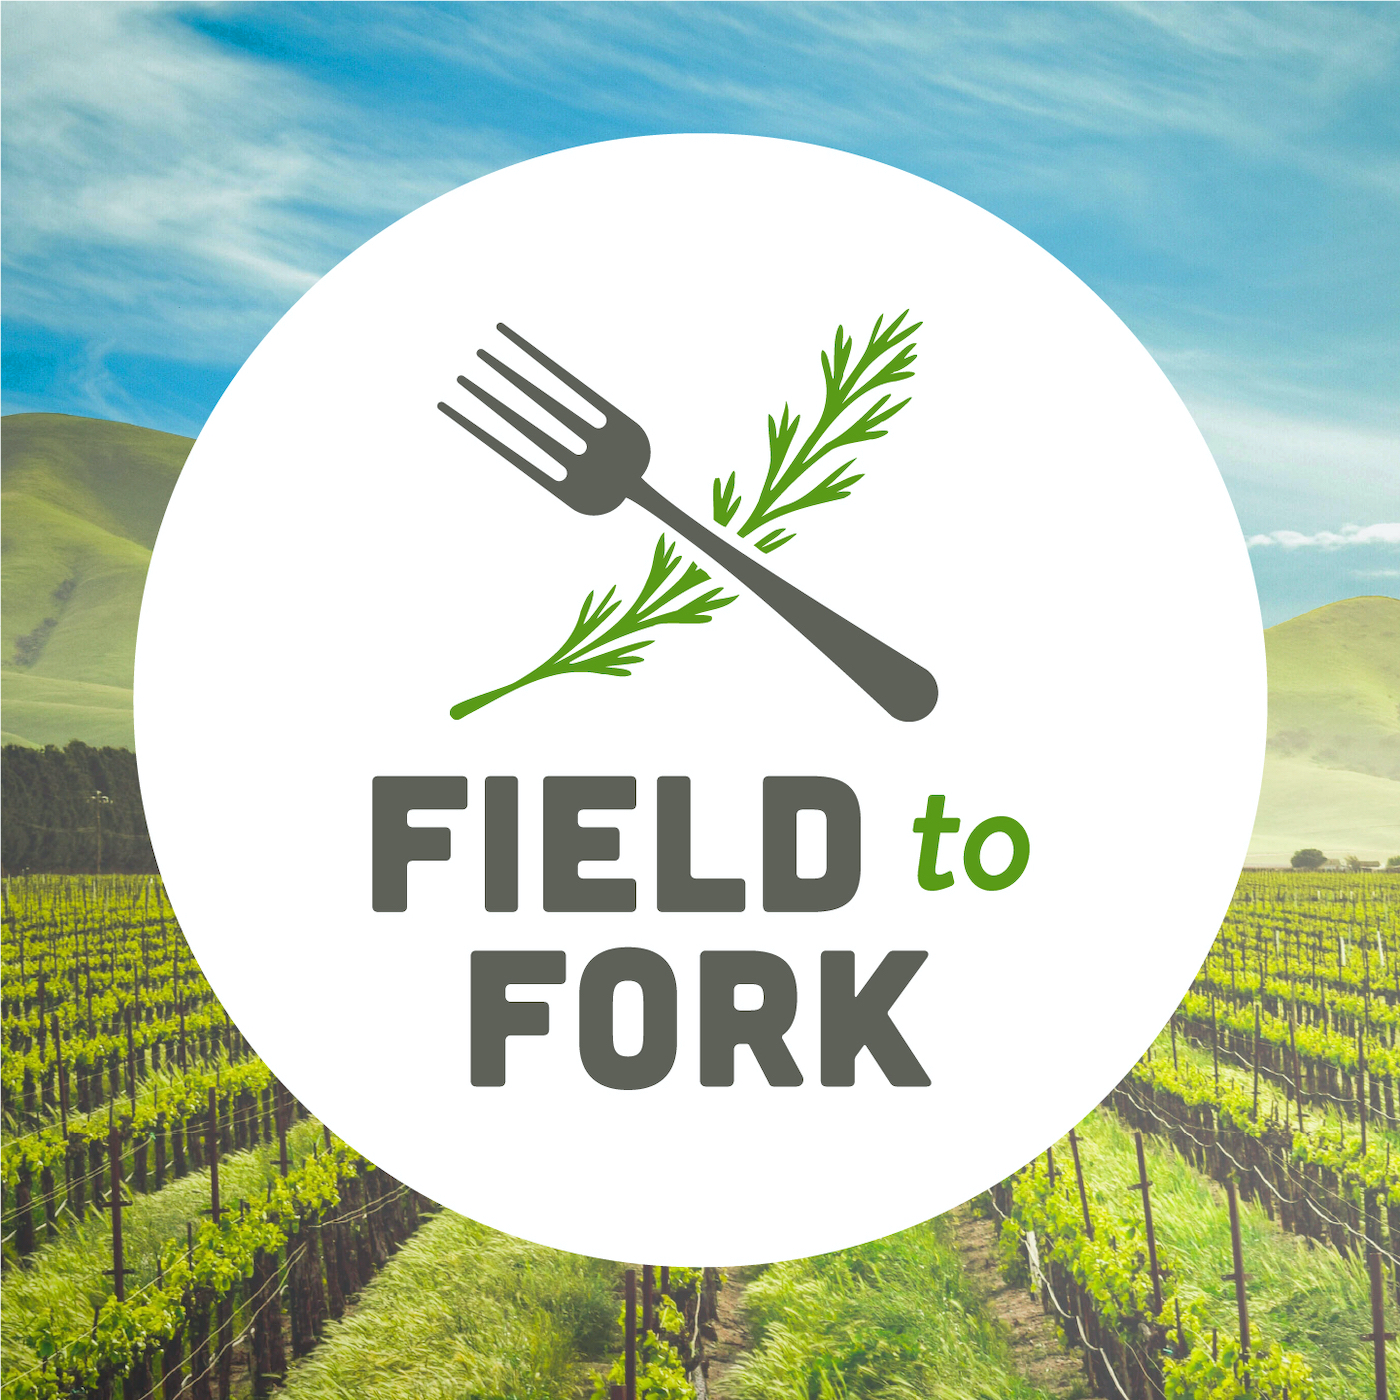 Artwork for podcast Field to Fork